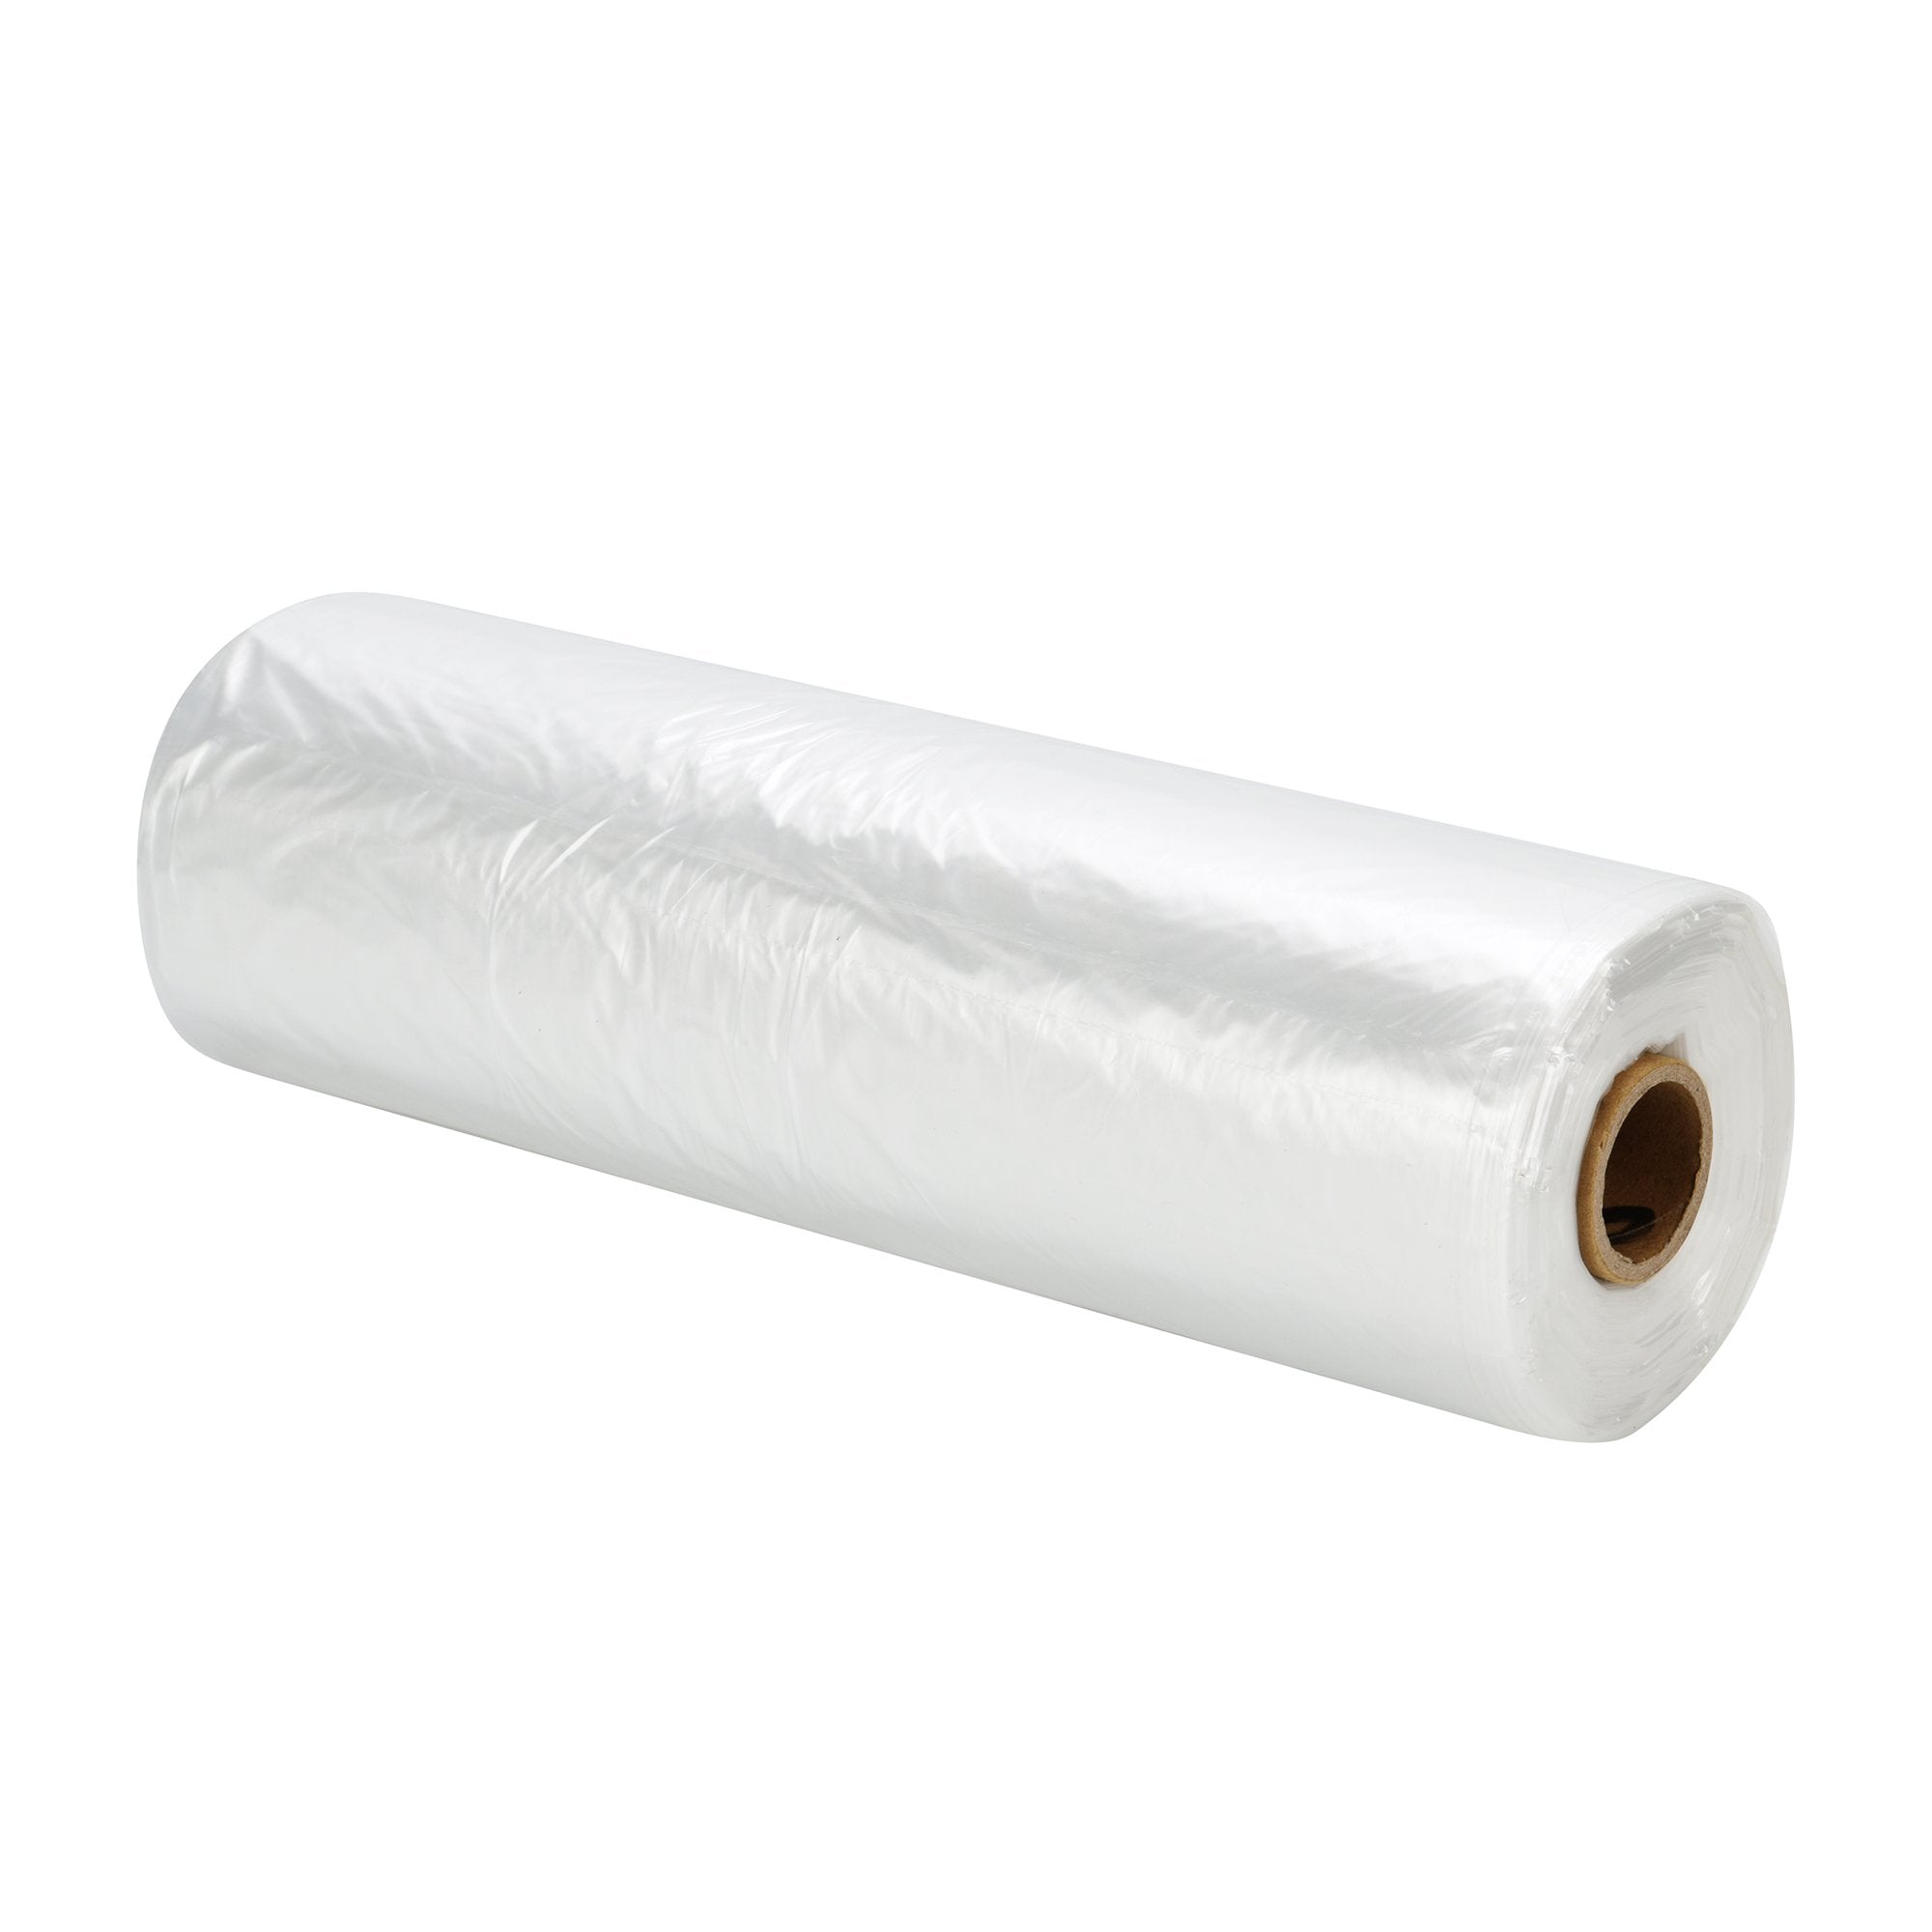 Plastic Produce Bag on A Roll Clear Plastic Bags Polyethylene Bags Plastic Storage Bags for Food, Fruit, Vegetables, Meat, Pet Bags, Diapers Bags